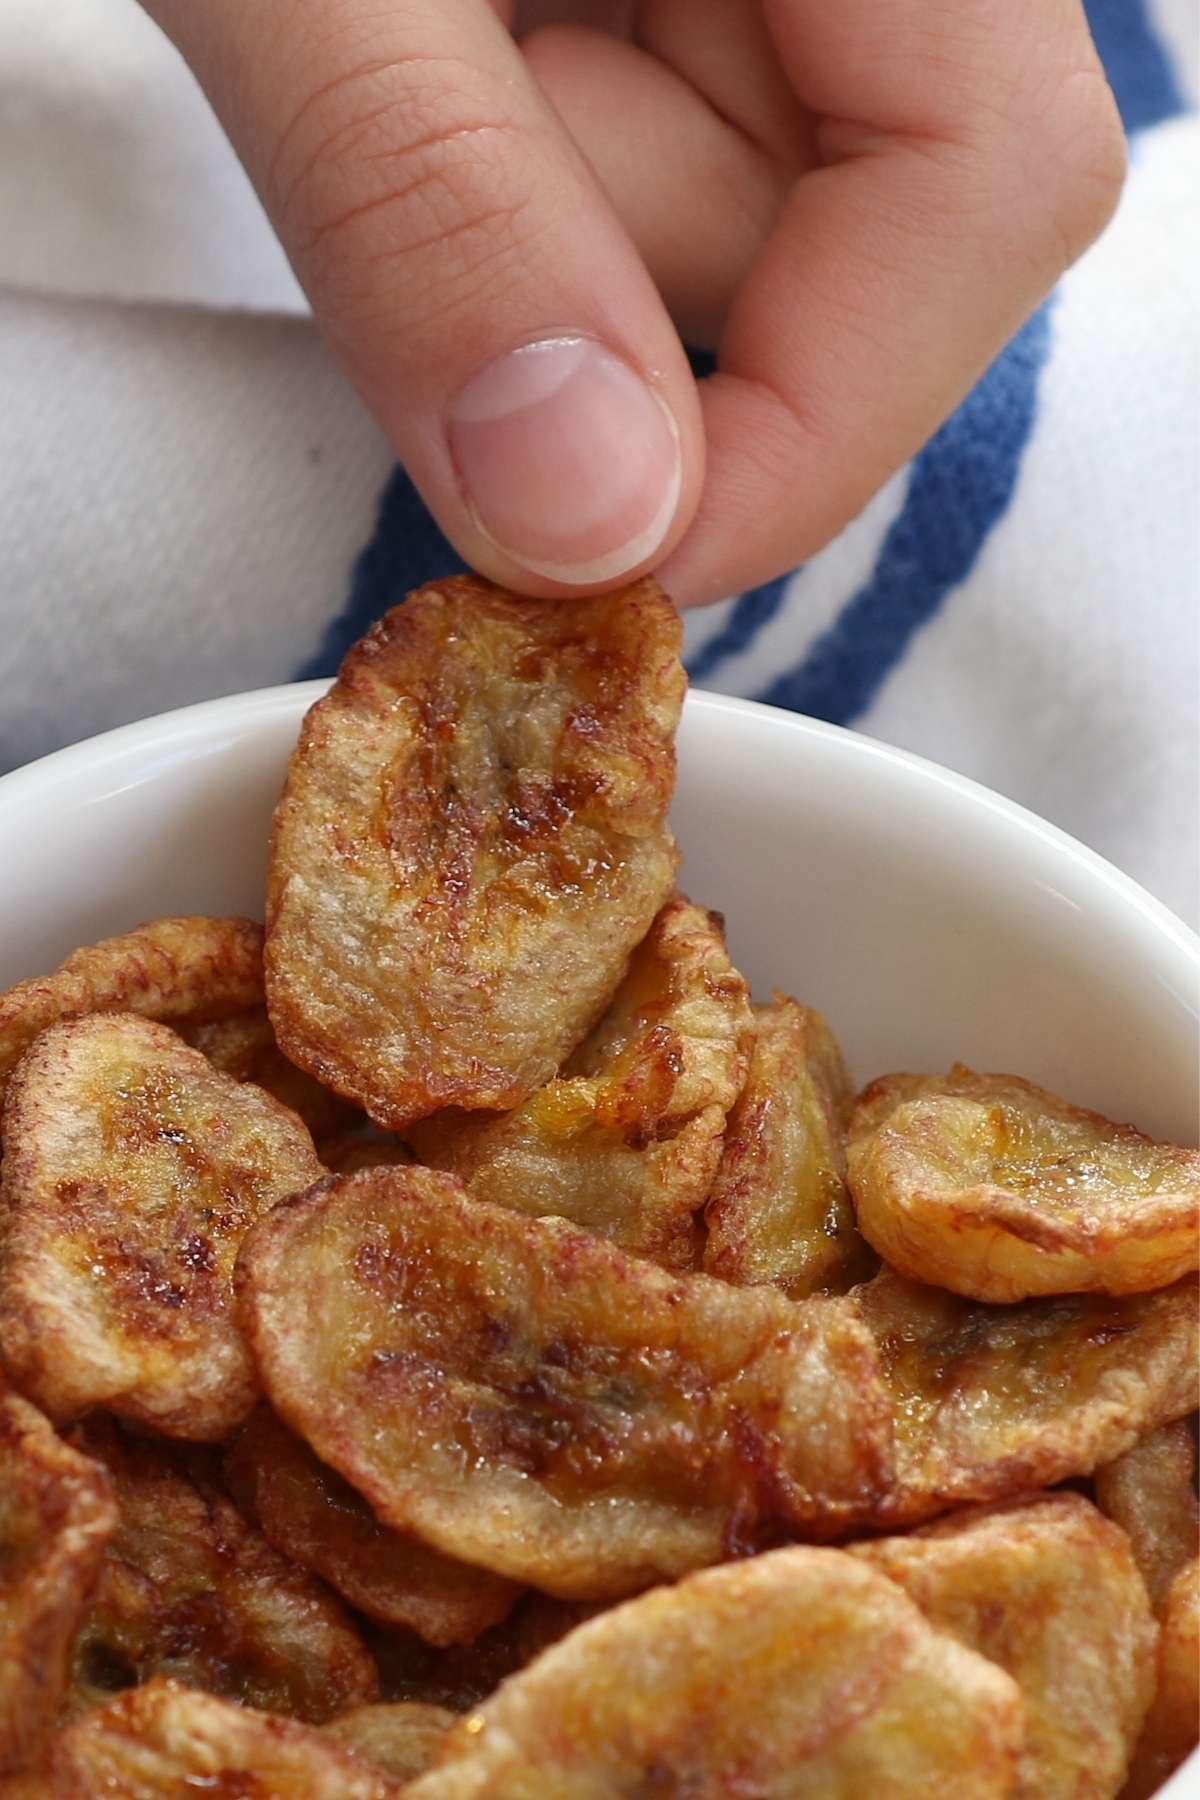 When prepared in the air fryer, homemade banana chips are a guilt-free, healthy, low-calorie snack made with simple ingredients. In this post, you’ll learn how to dehydrate bananas in an air fryer.